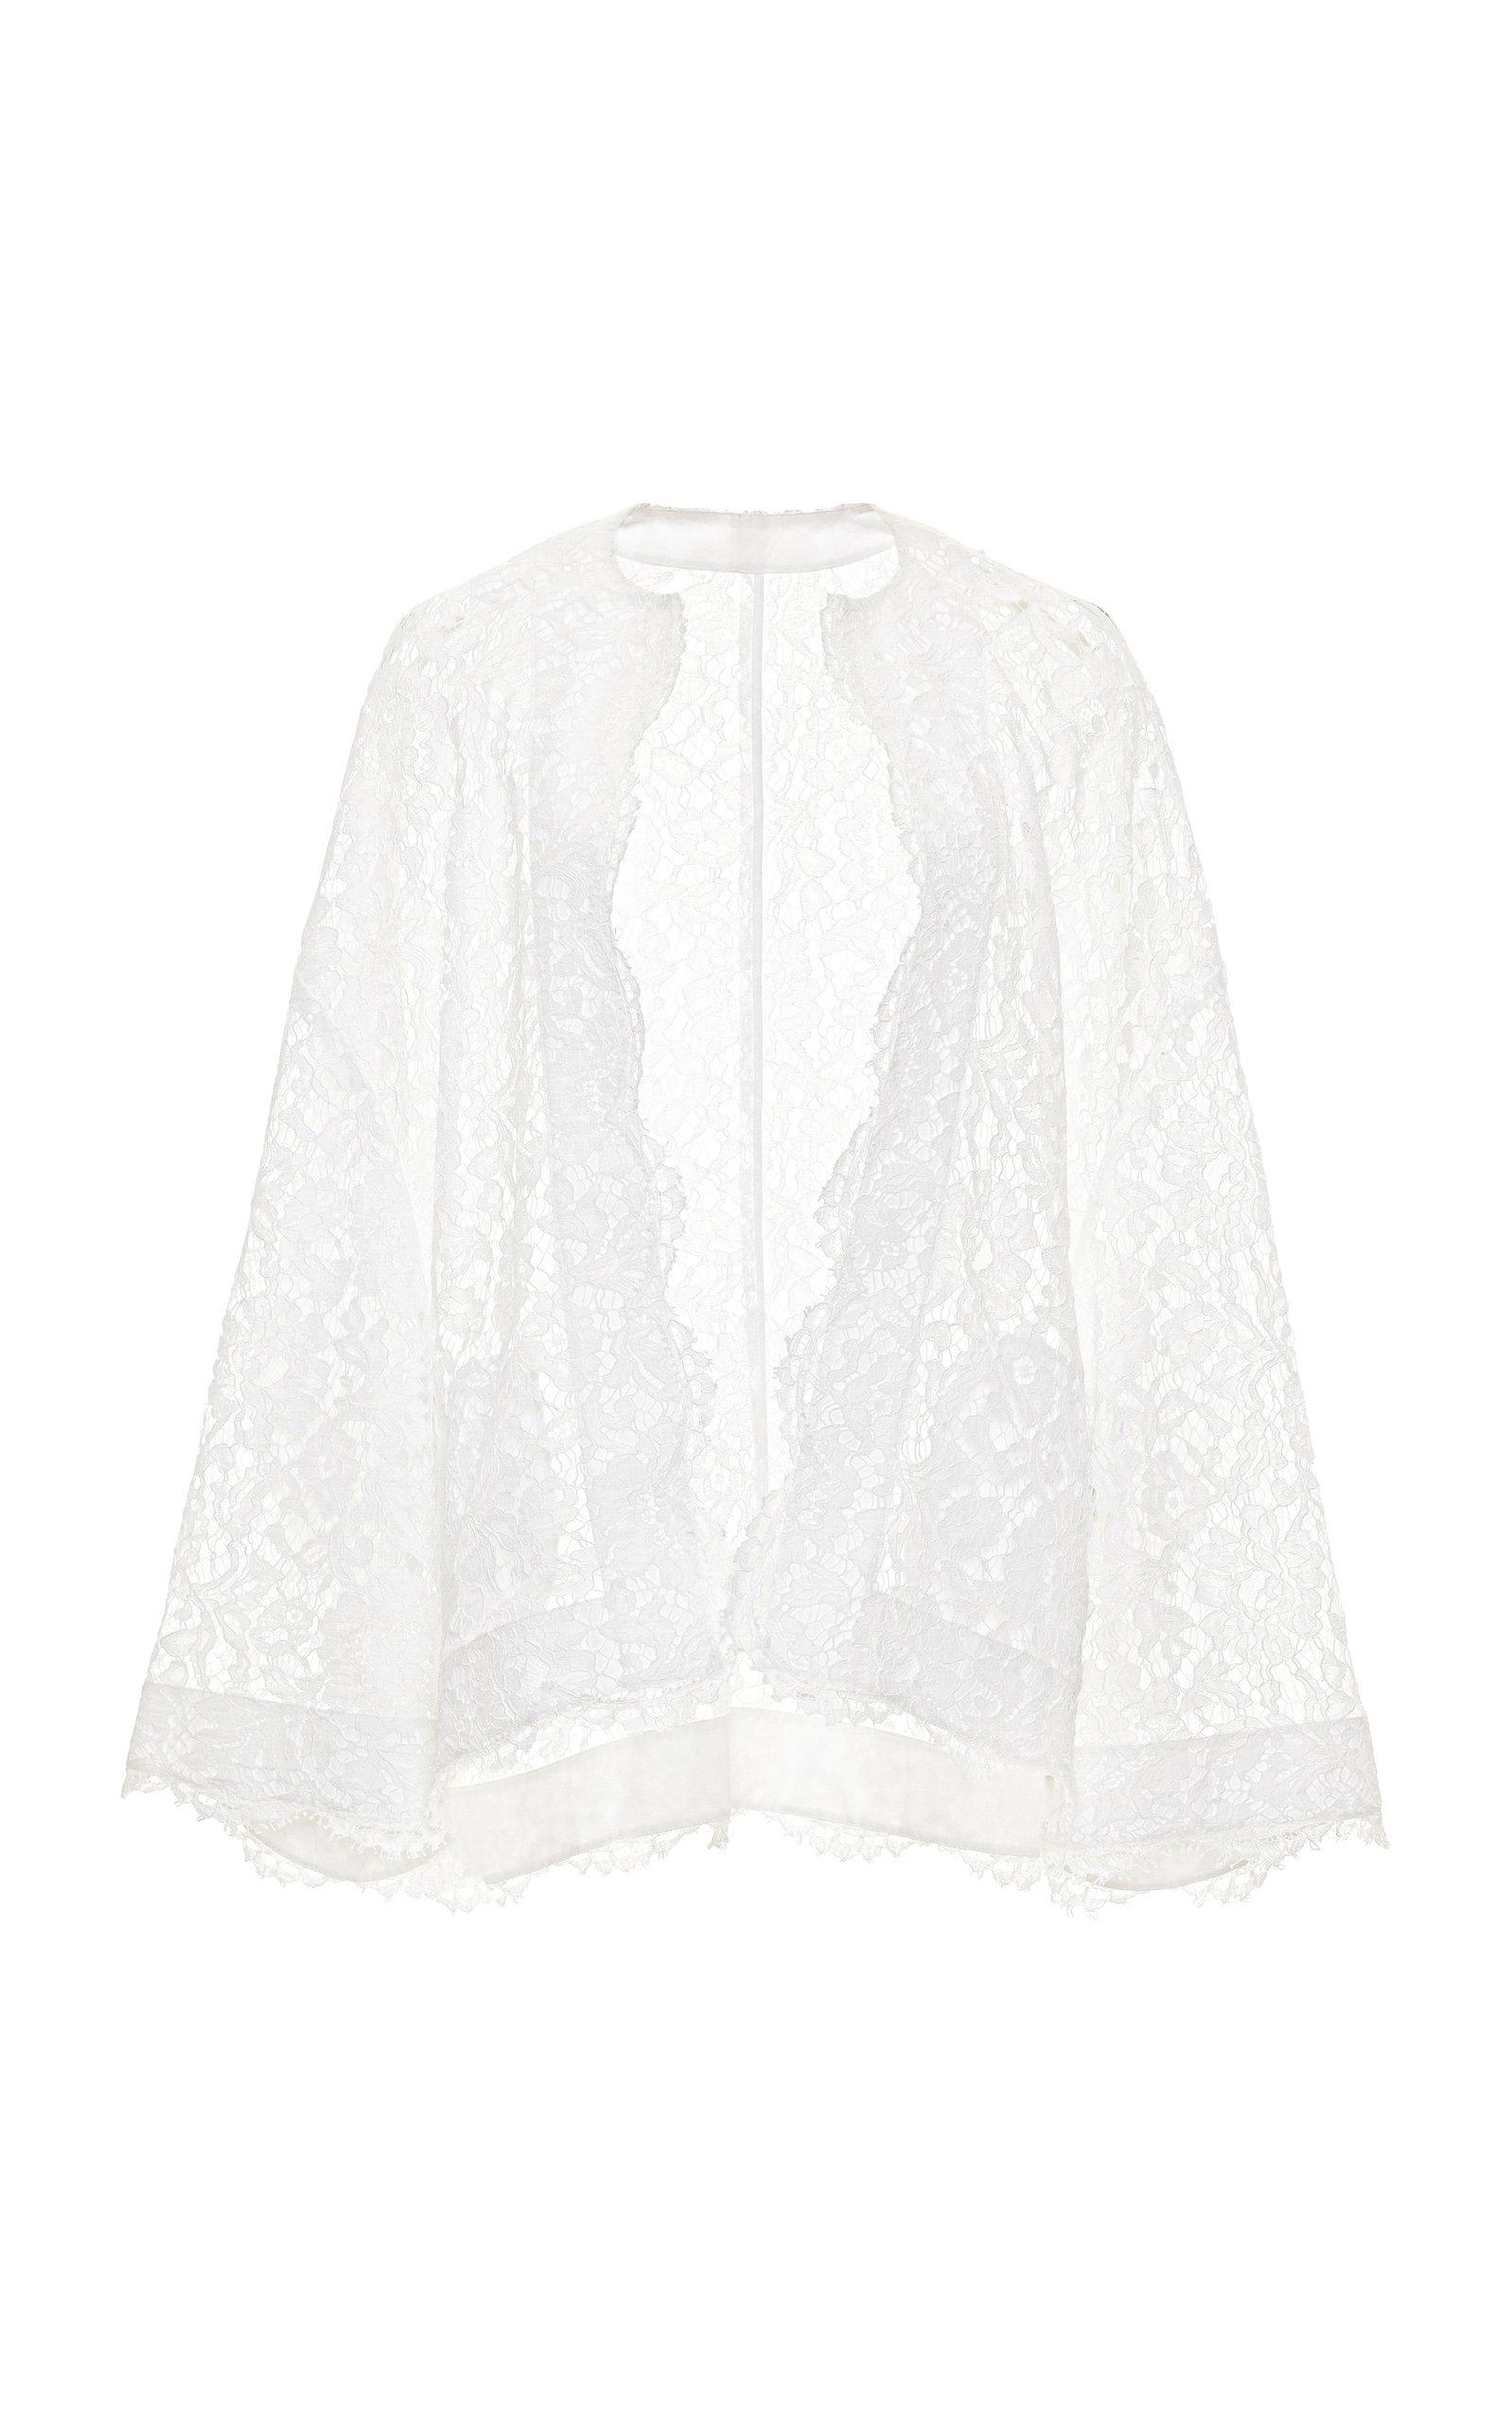 Valentino Open Front Lace Jacket in White - Lyst